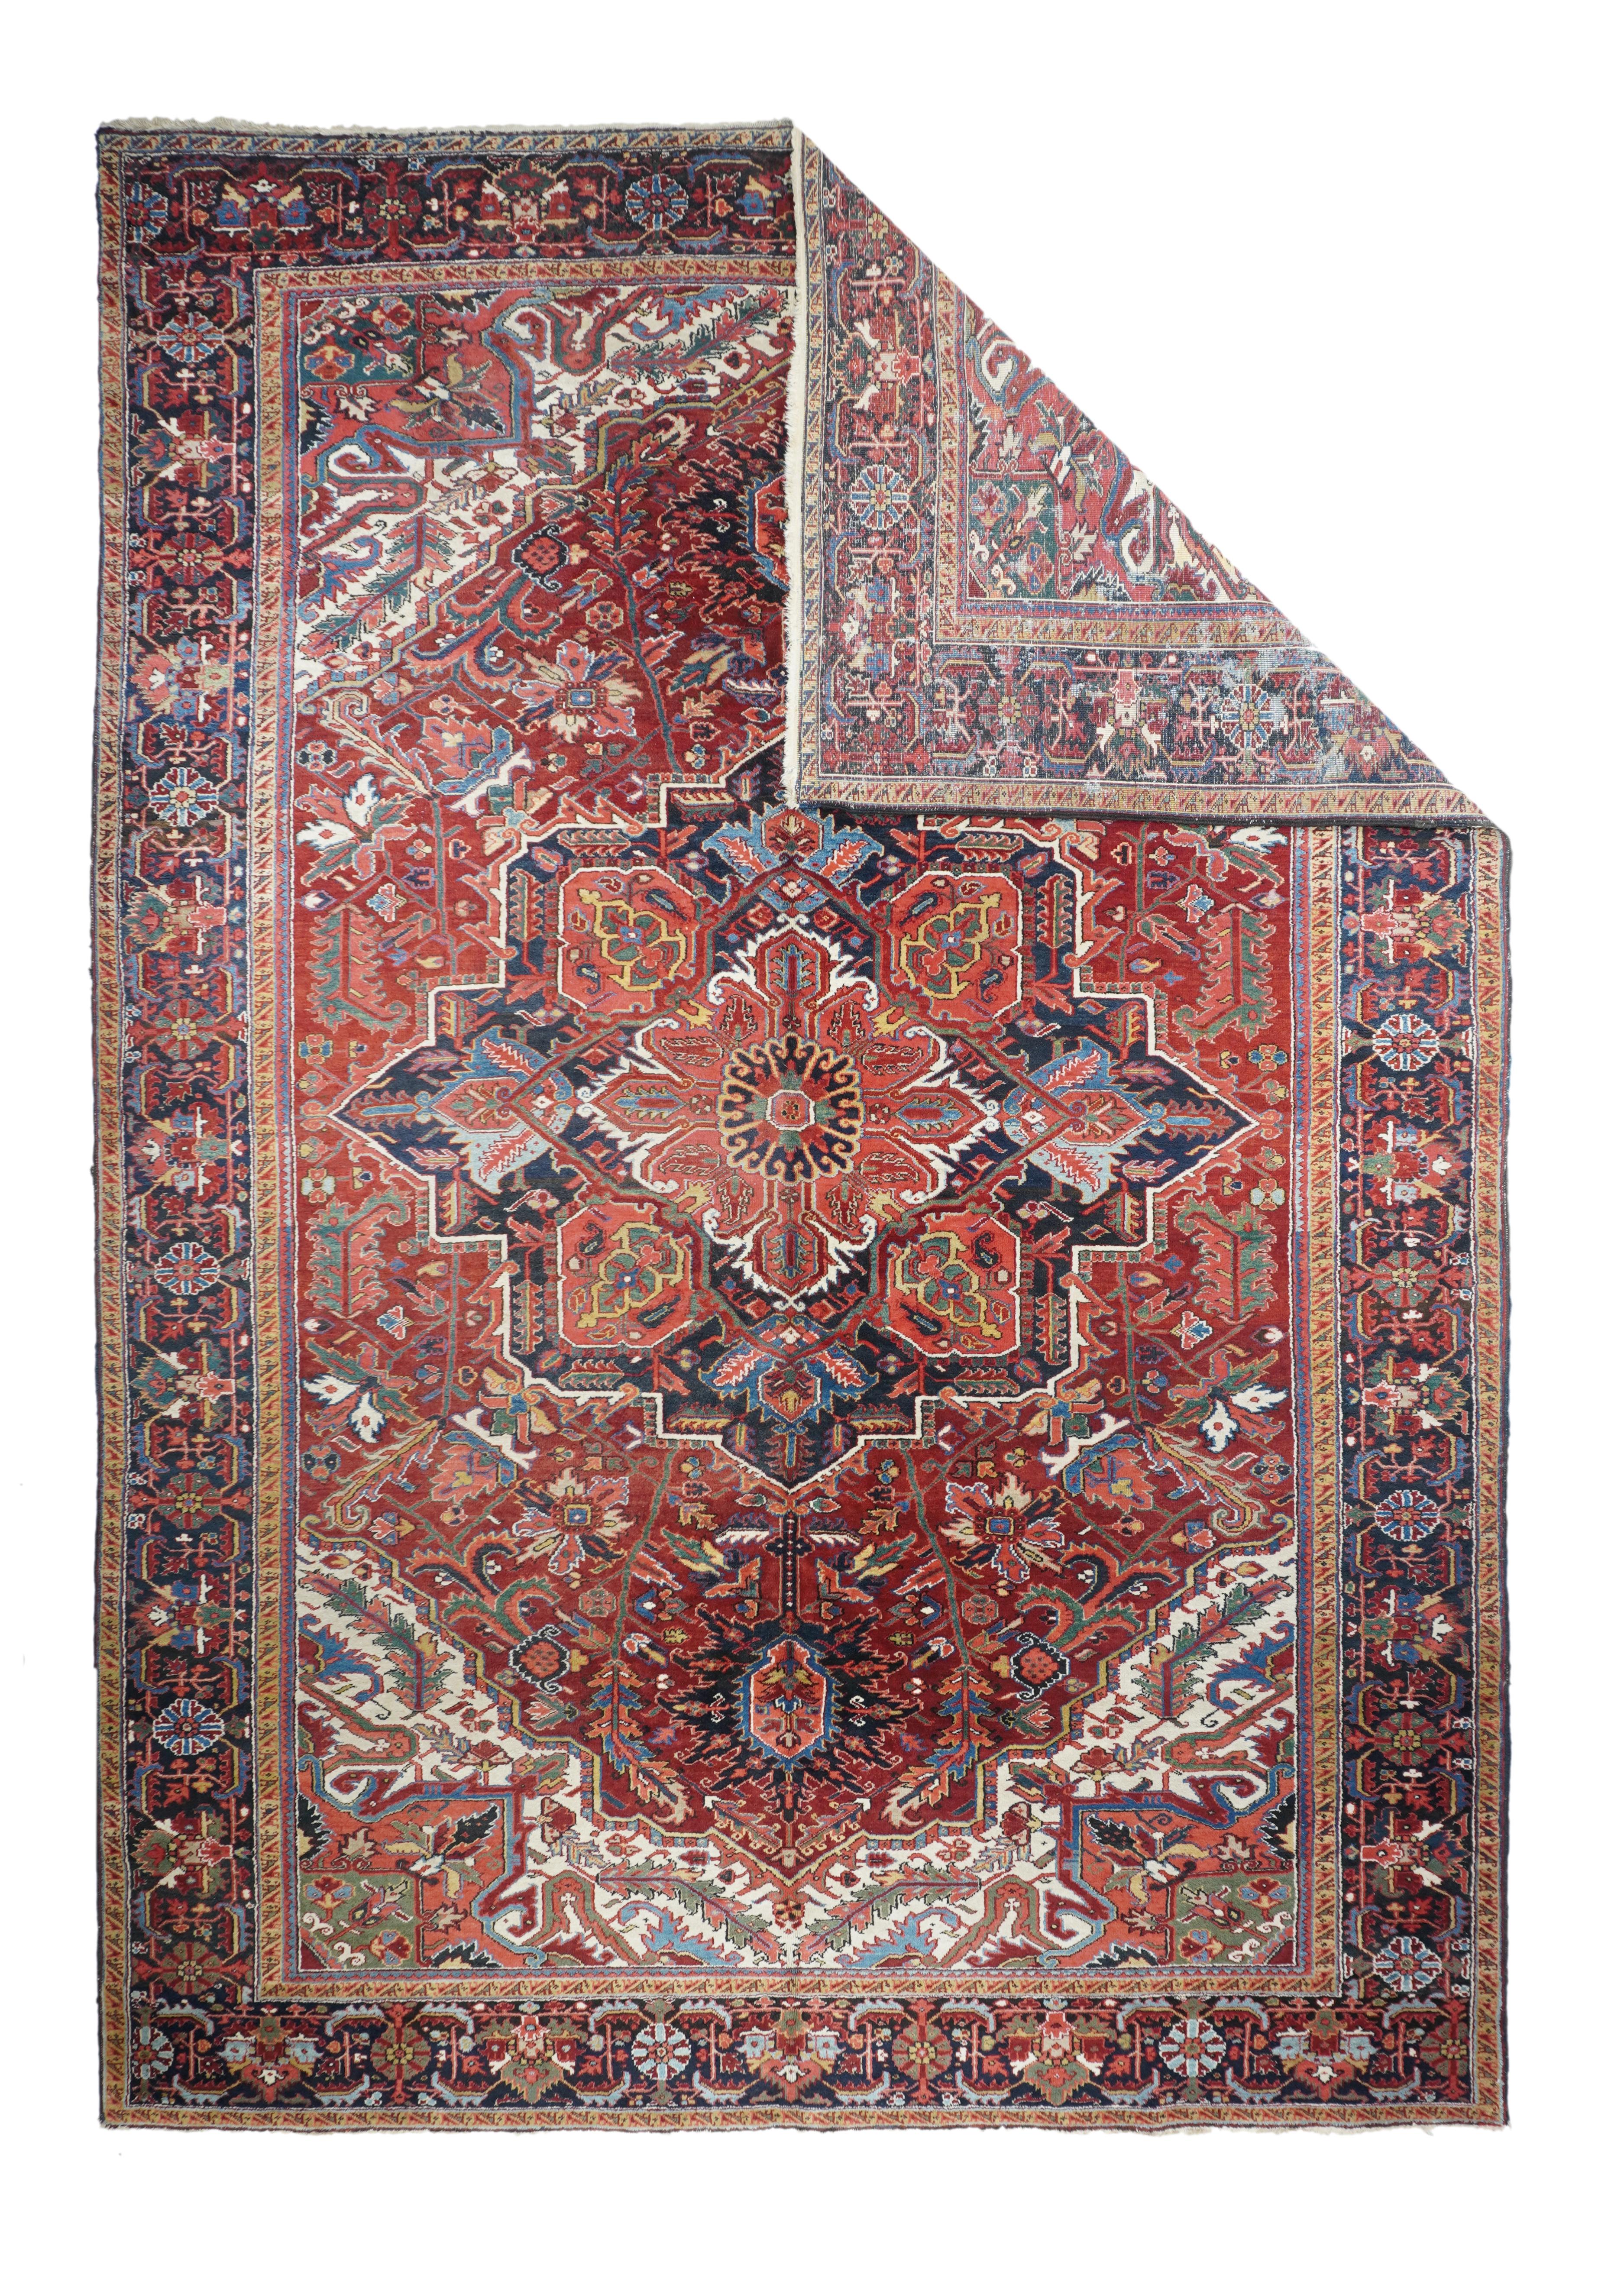 This good condition, cotton foundation, moderately coarsely woven NW Persian village carpet displays a characteristic warm red field centred by a navy octogramme with every second point beveled and pending navy ragged palmettes. Torn and barbed